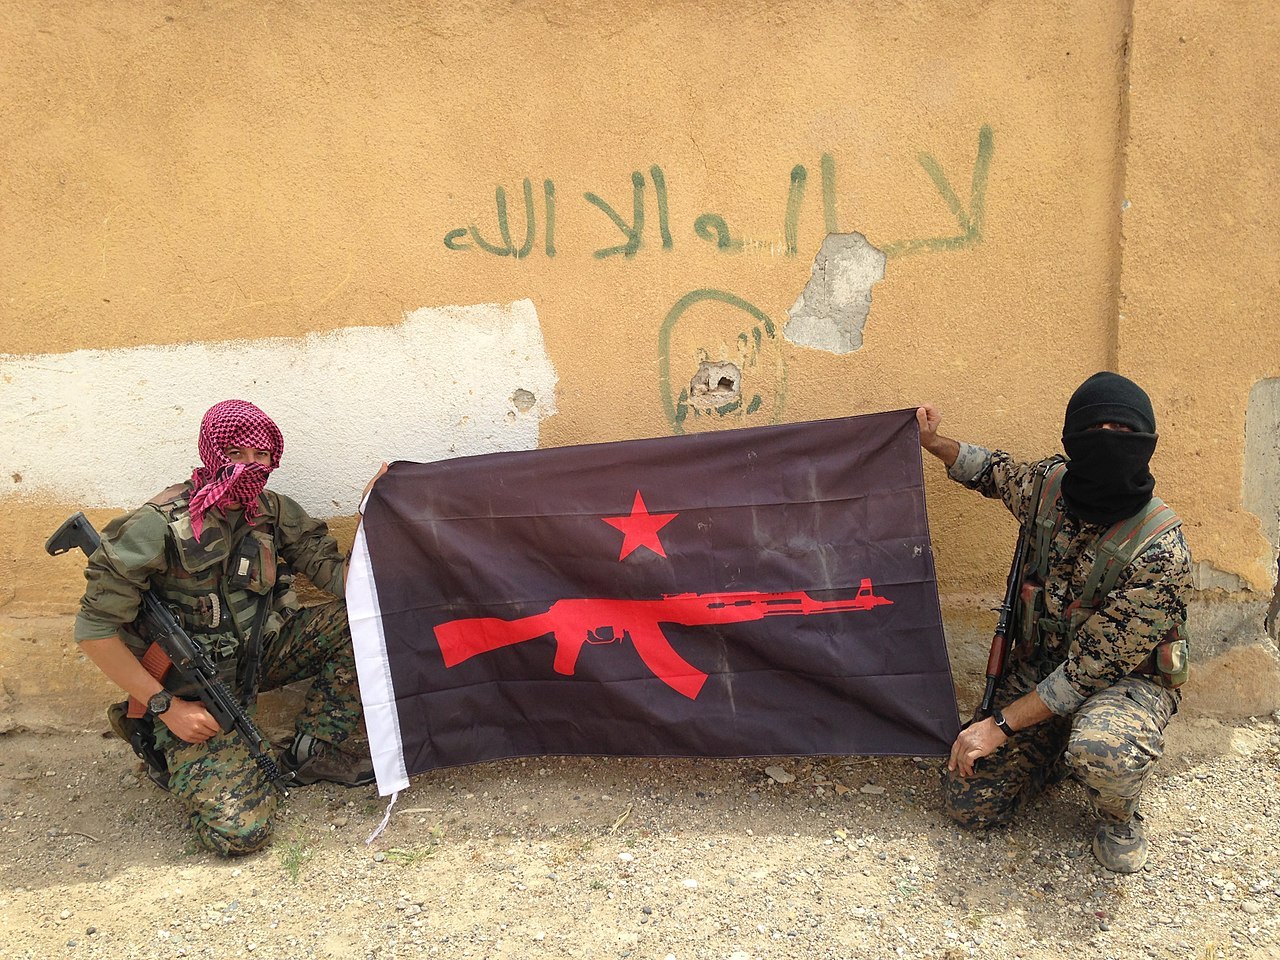 IRPGF fighers holding their flag in Rojava